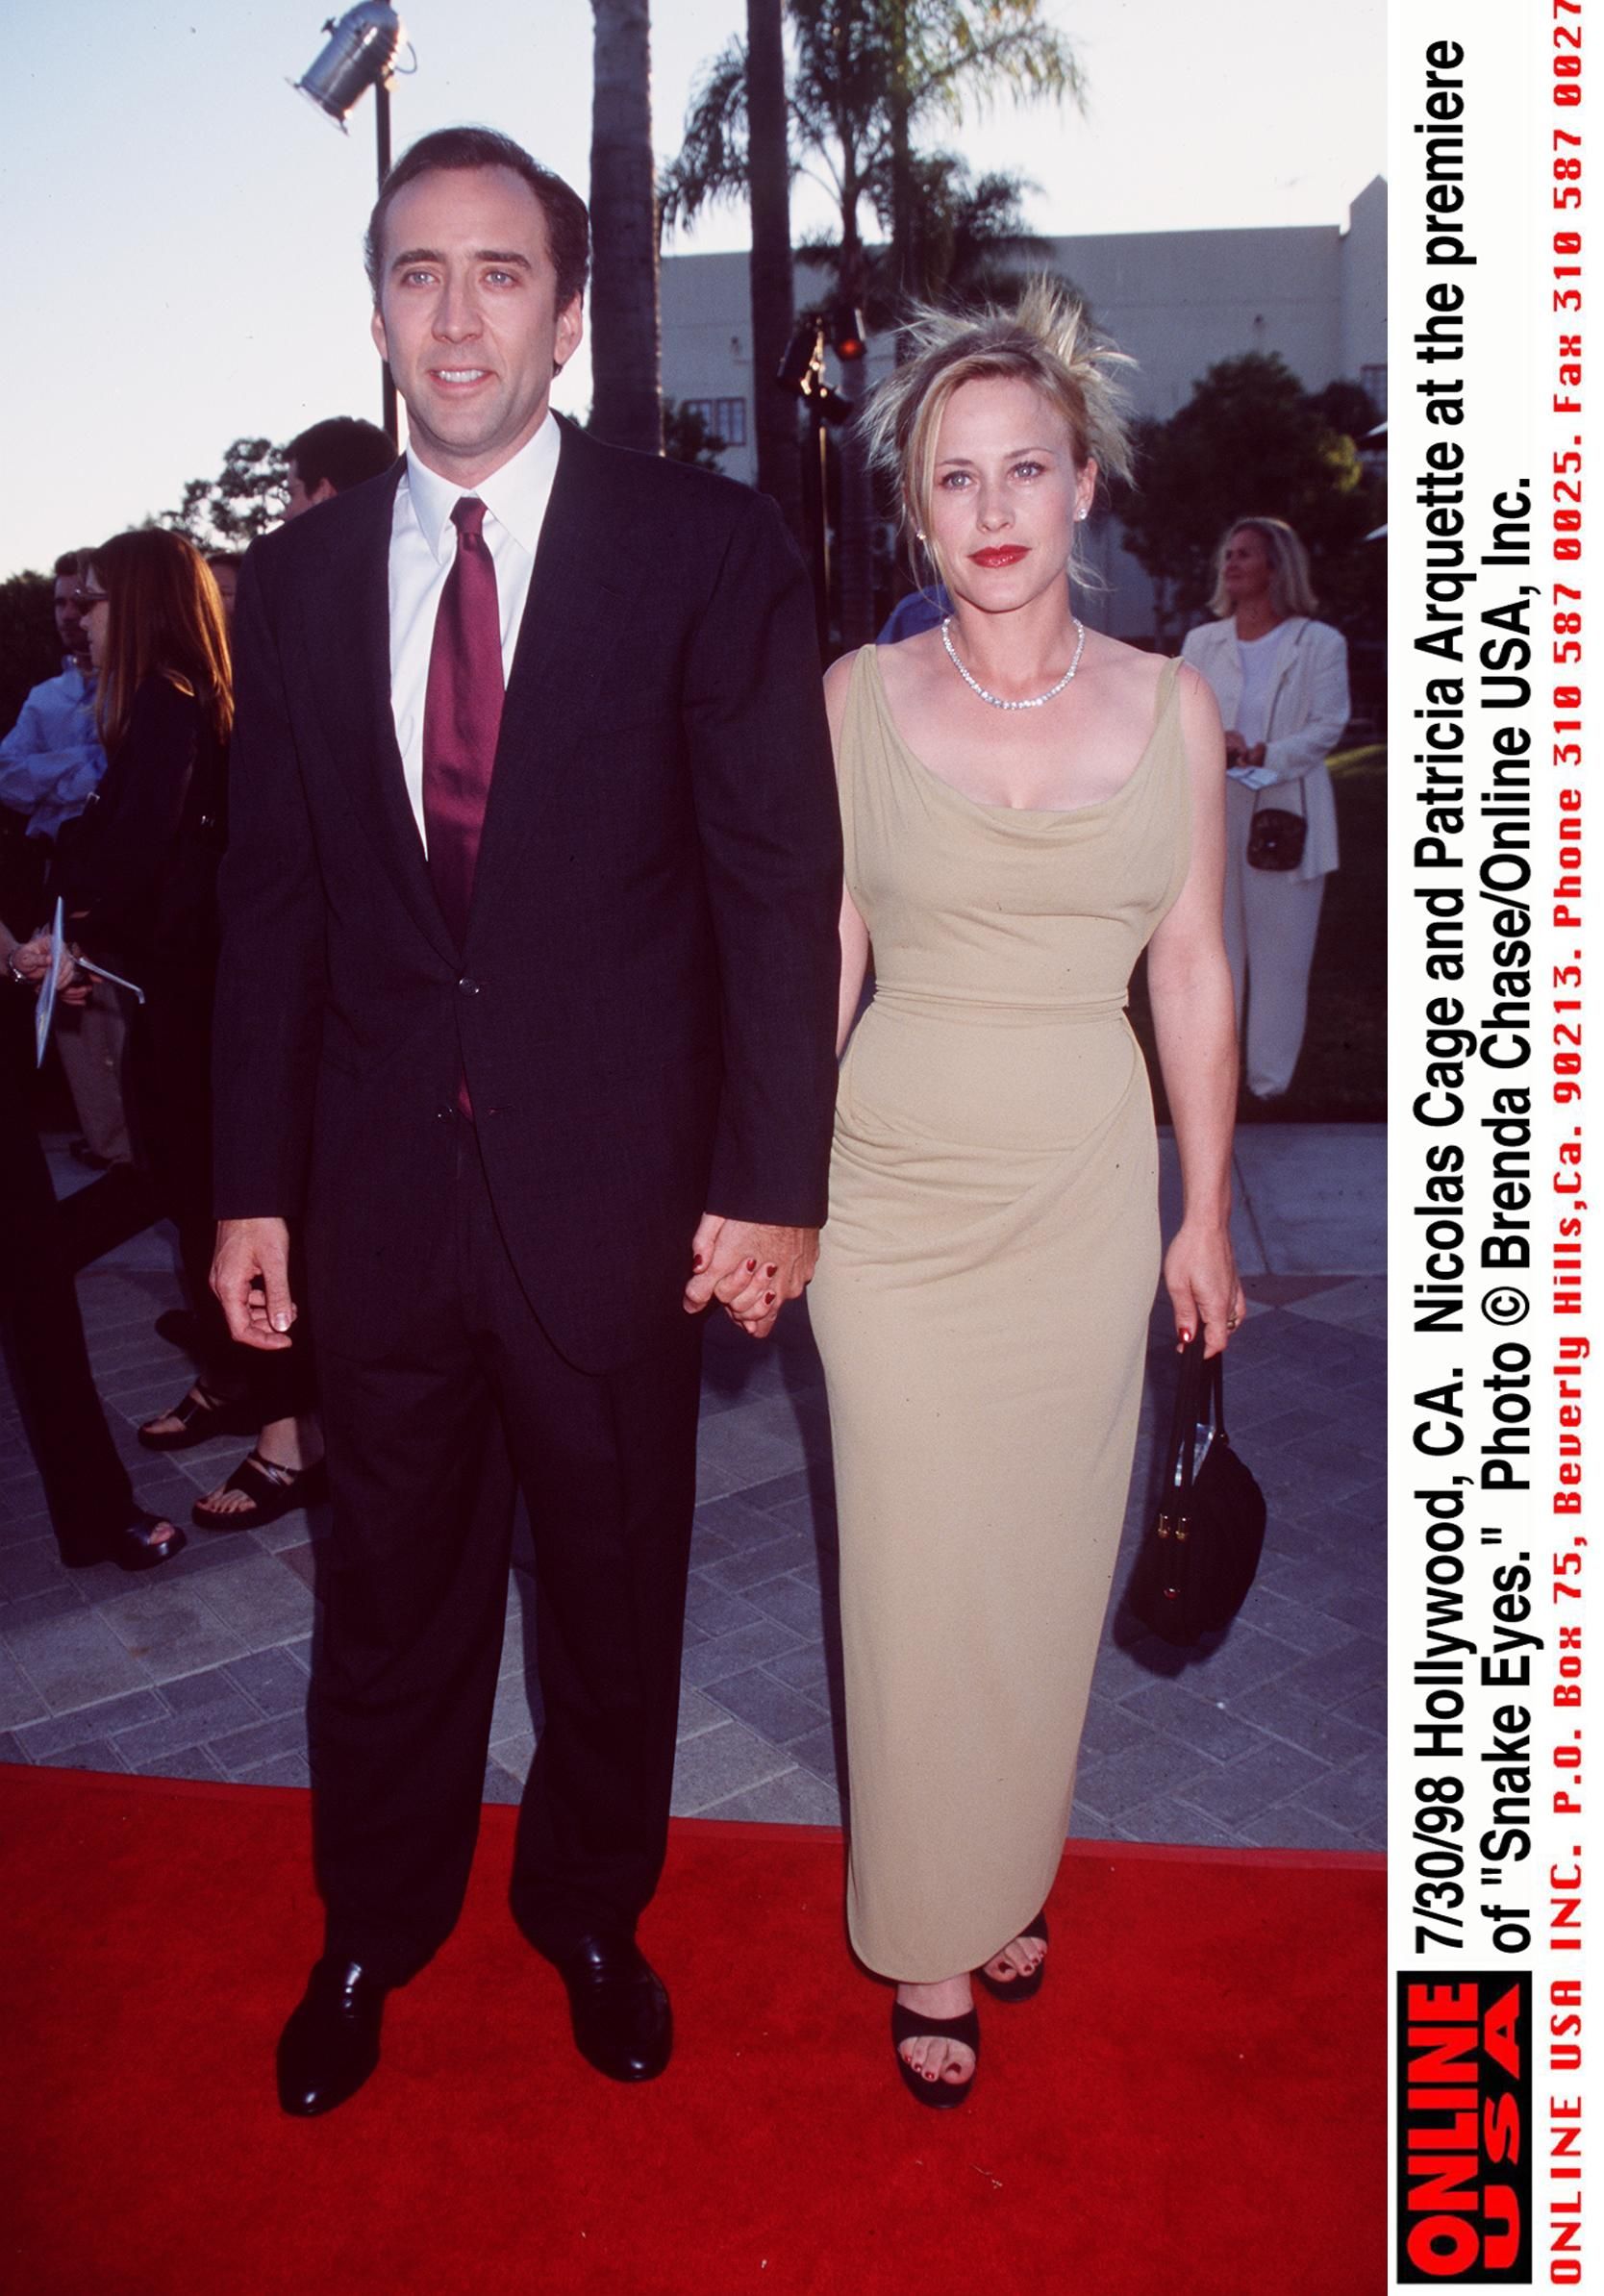 Nicolas Cage and Patricia Arquette at the premiere of "Snake Eyes" on July 30, 1998, in Hollywood, California. | Source: Brenda Chase/Online USA, Inc/Getty Images